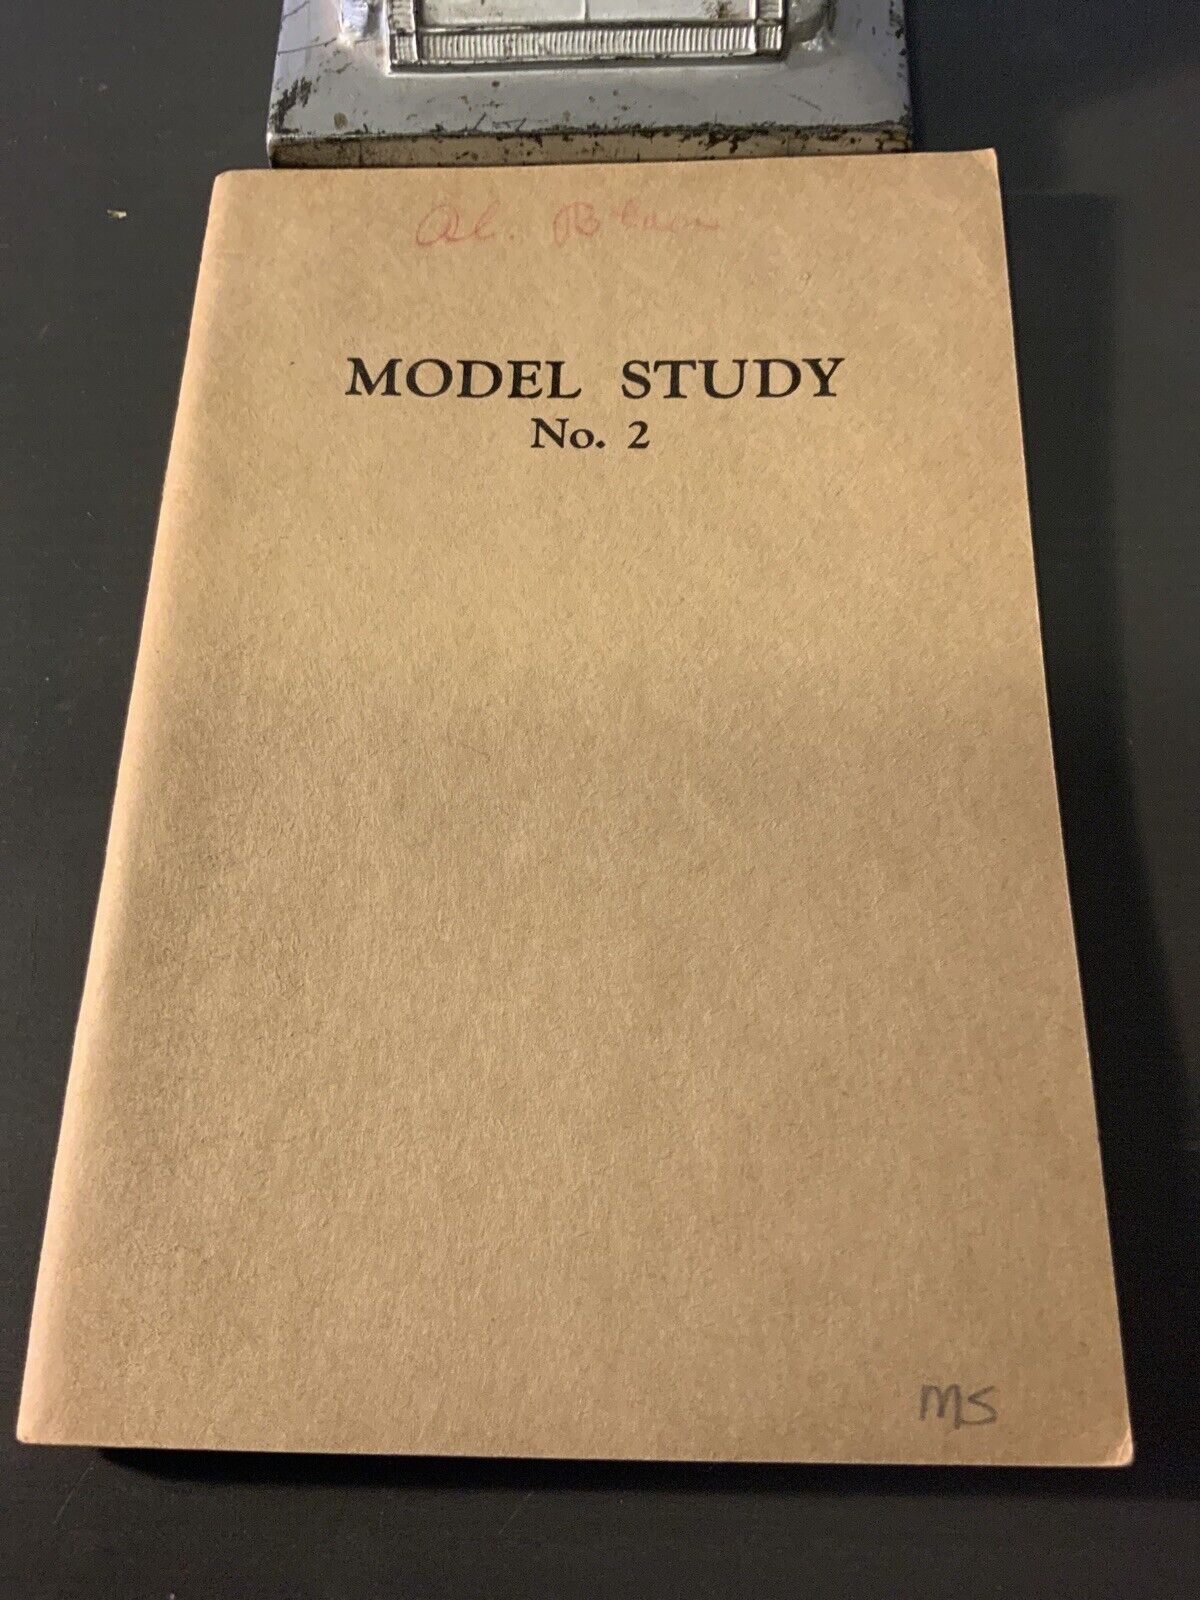 Watchtower Jehovah Original 1939 Booklet Model Study 2